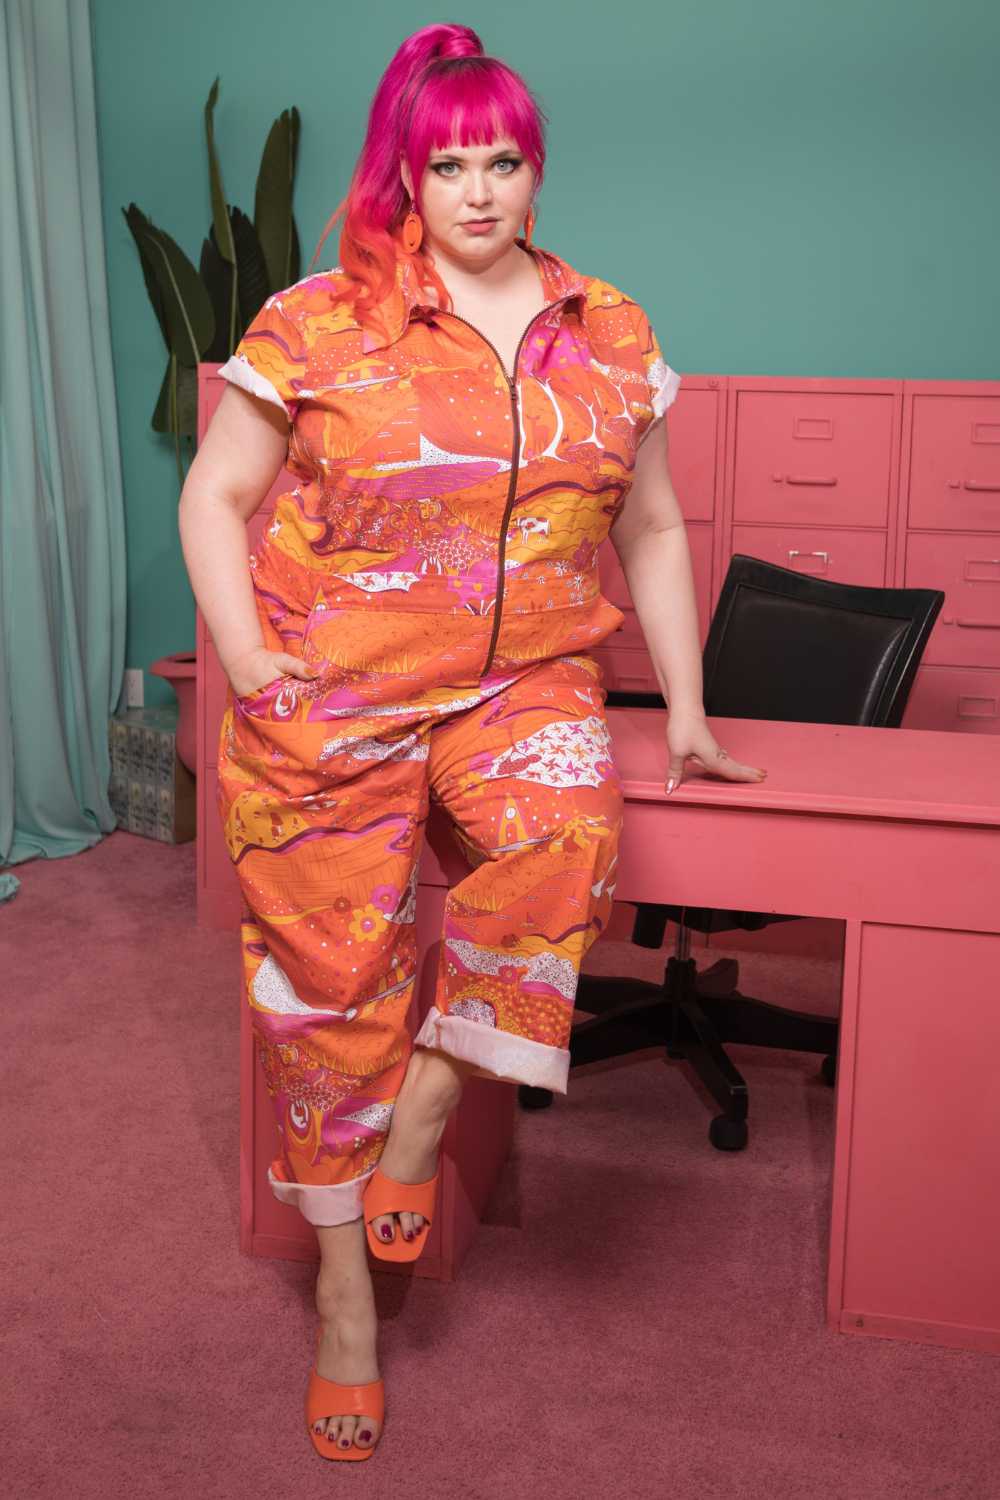 Pink-haired model leaning on office desk while wearing psychedelic jumpsuit in reds, oranges, and pink